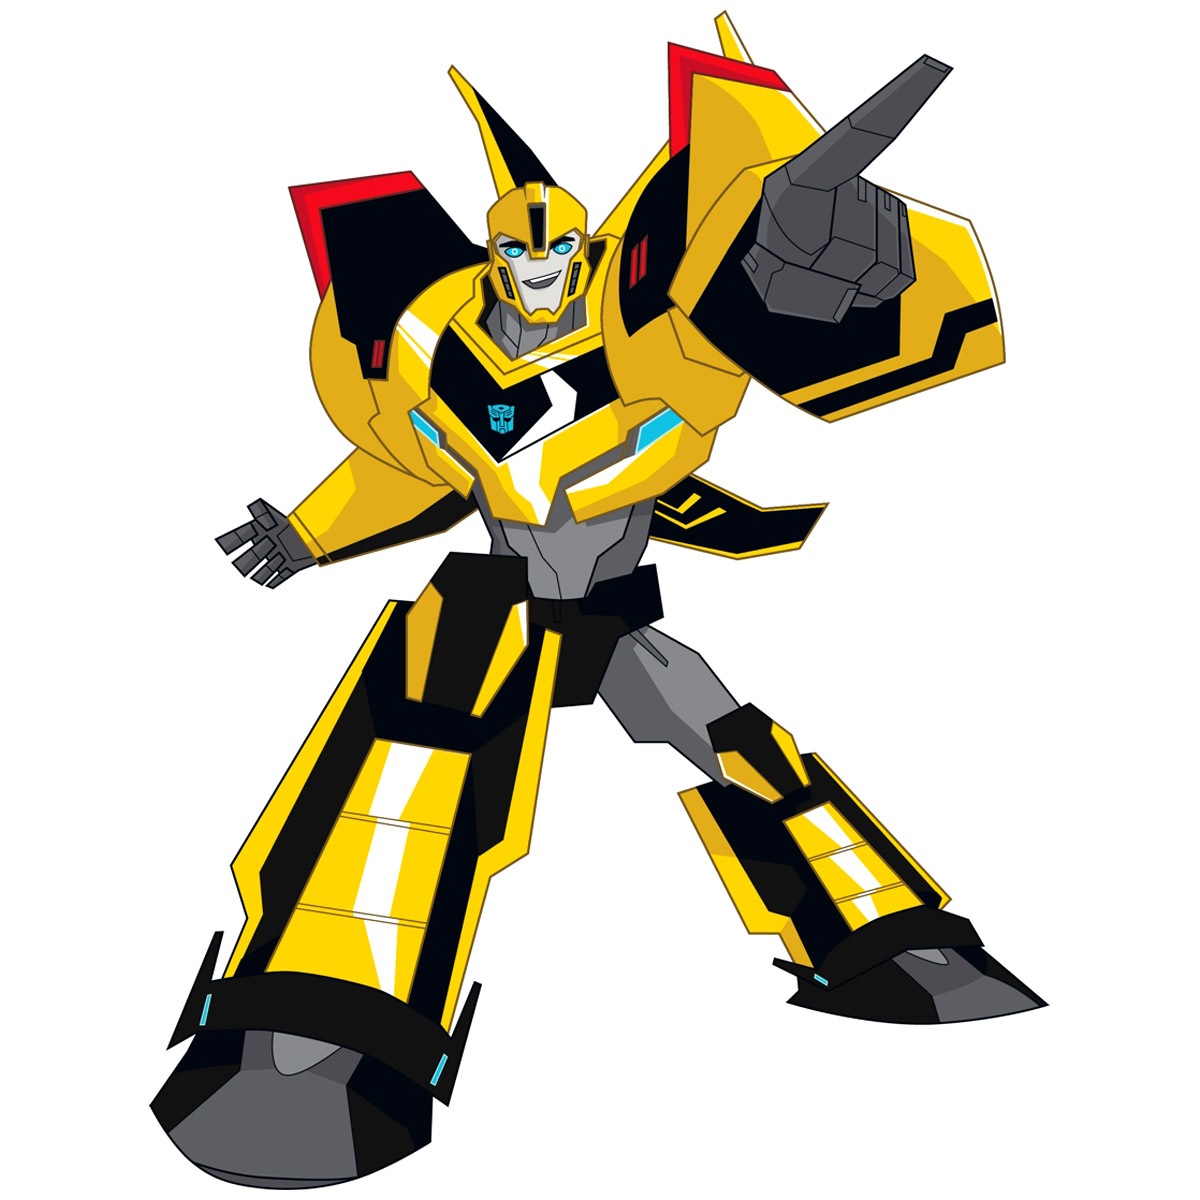 New Transformers Cartoon Revealed - First Look at Bumblebee ...